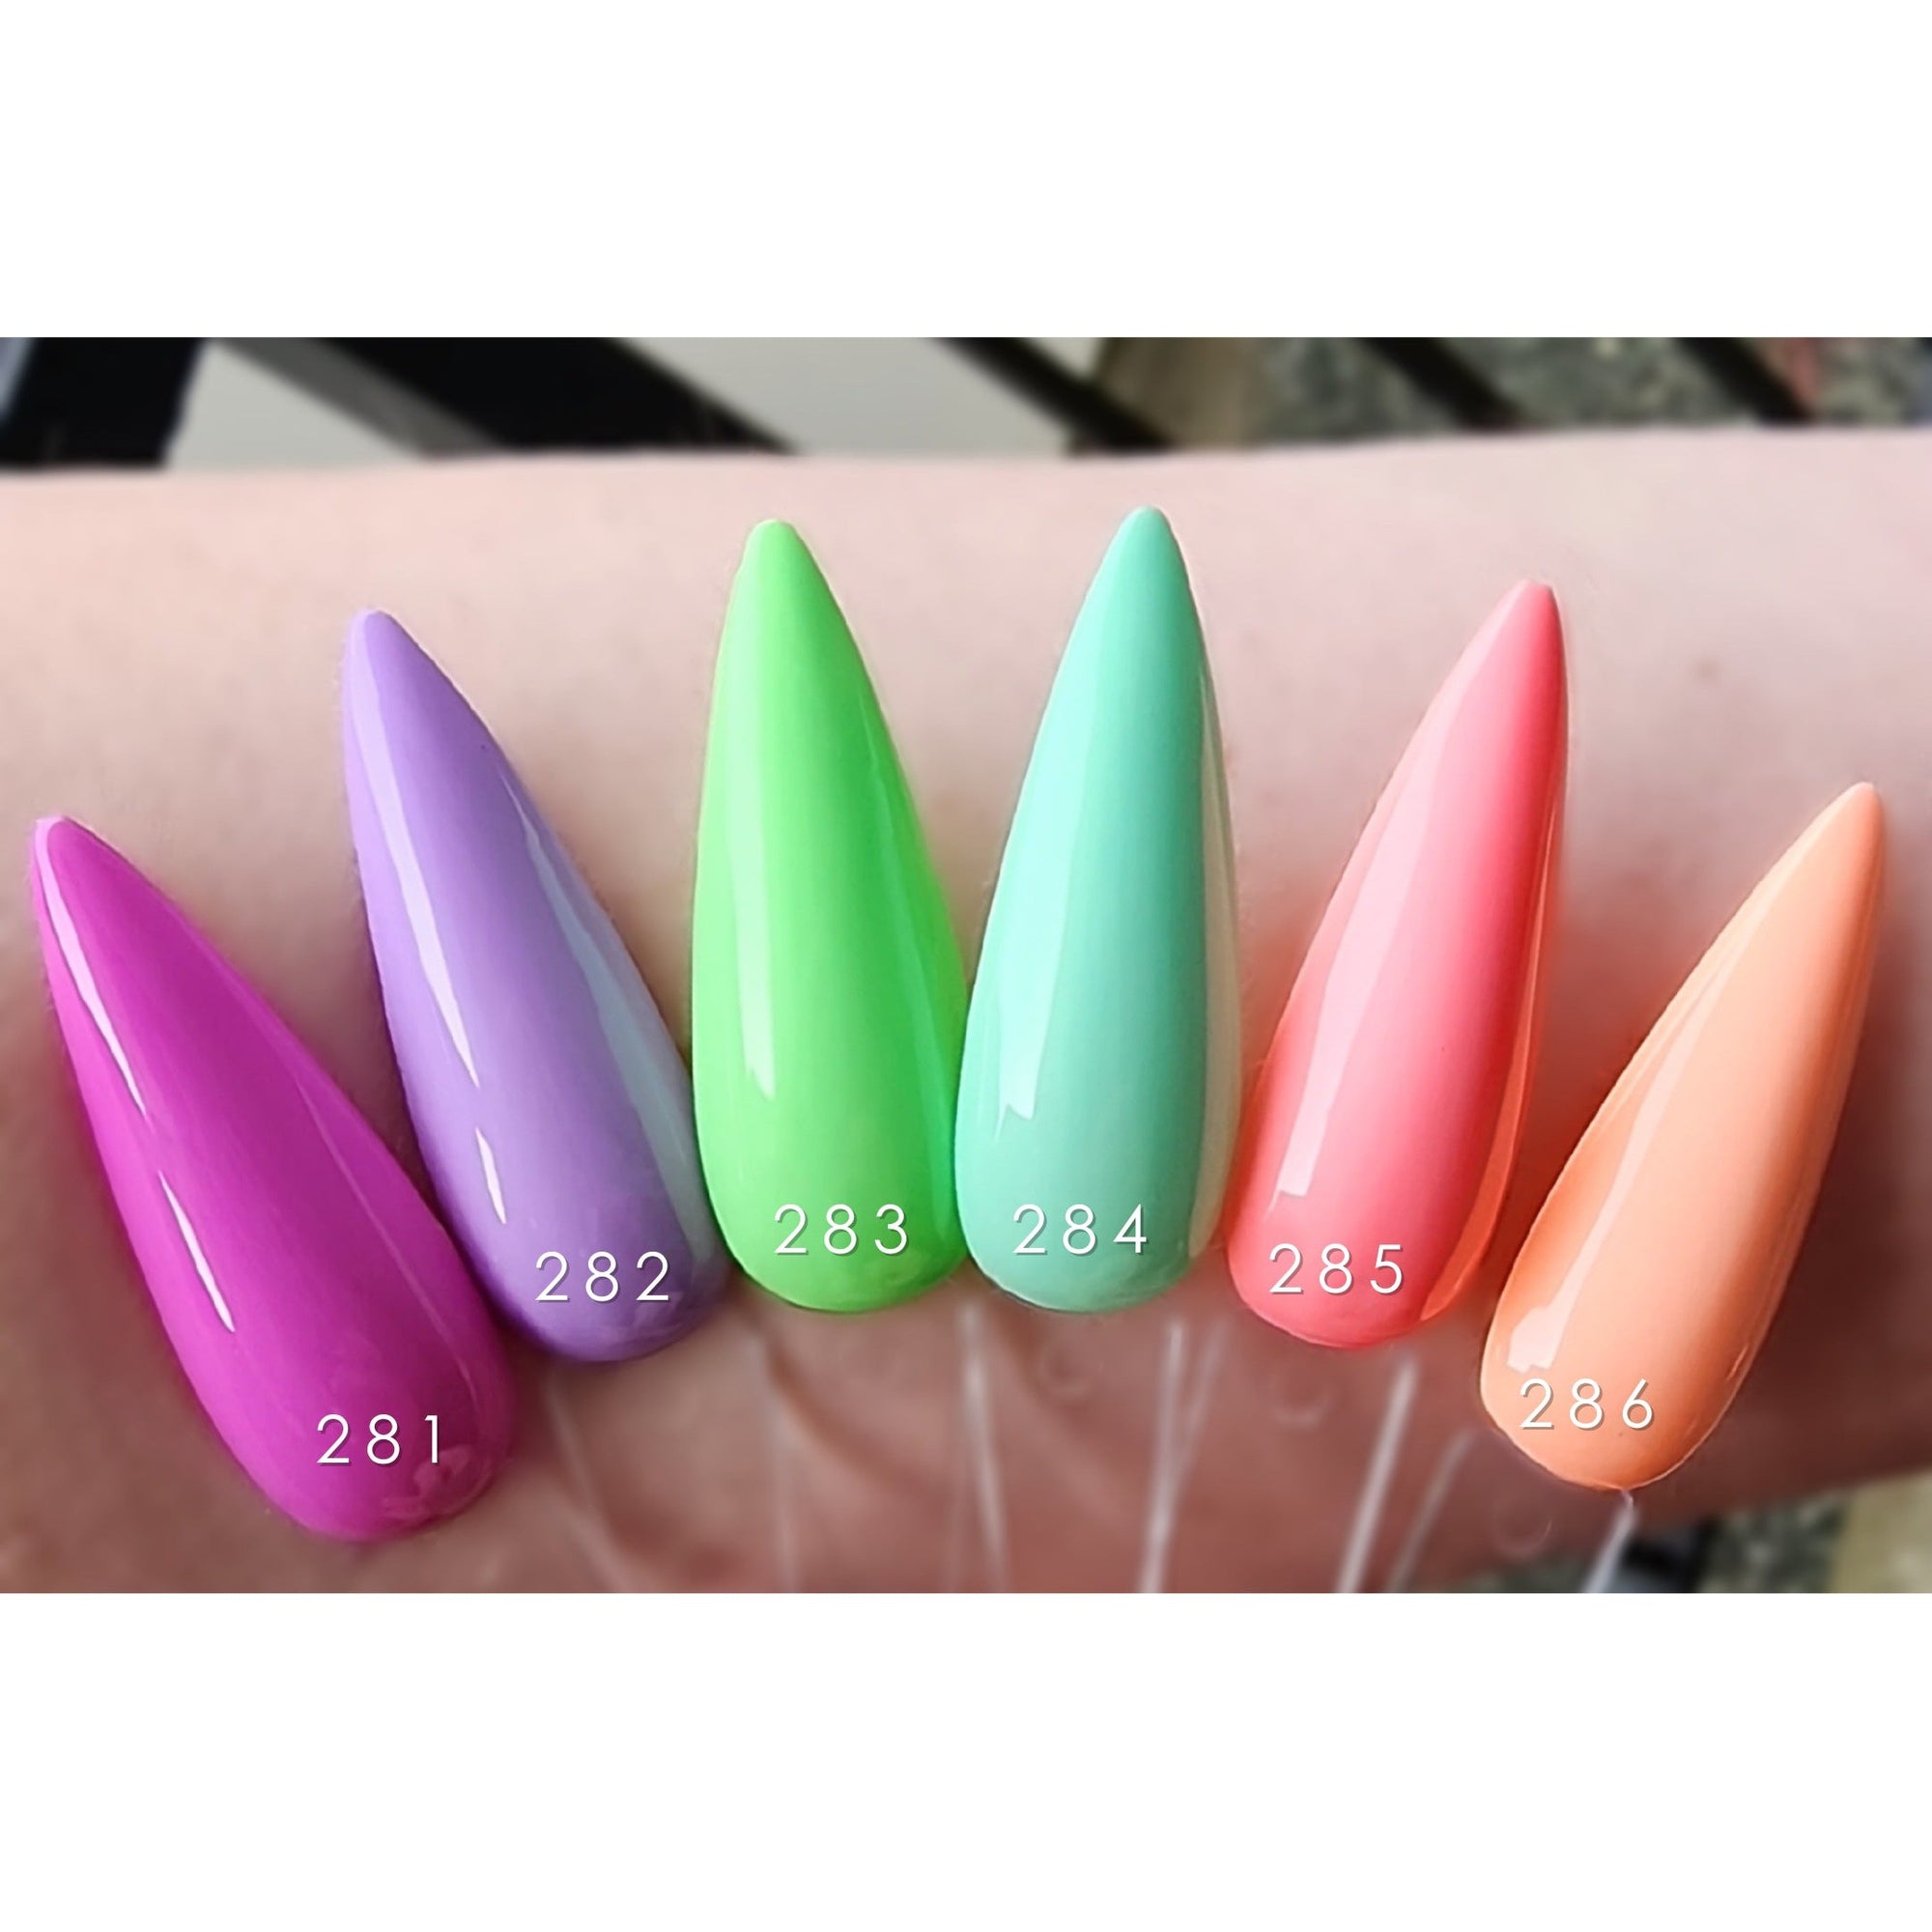 UD Gel Polish - Pastel Neon 6pc Collection 281-286